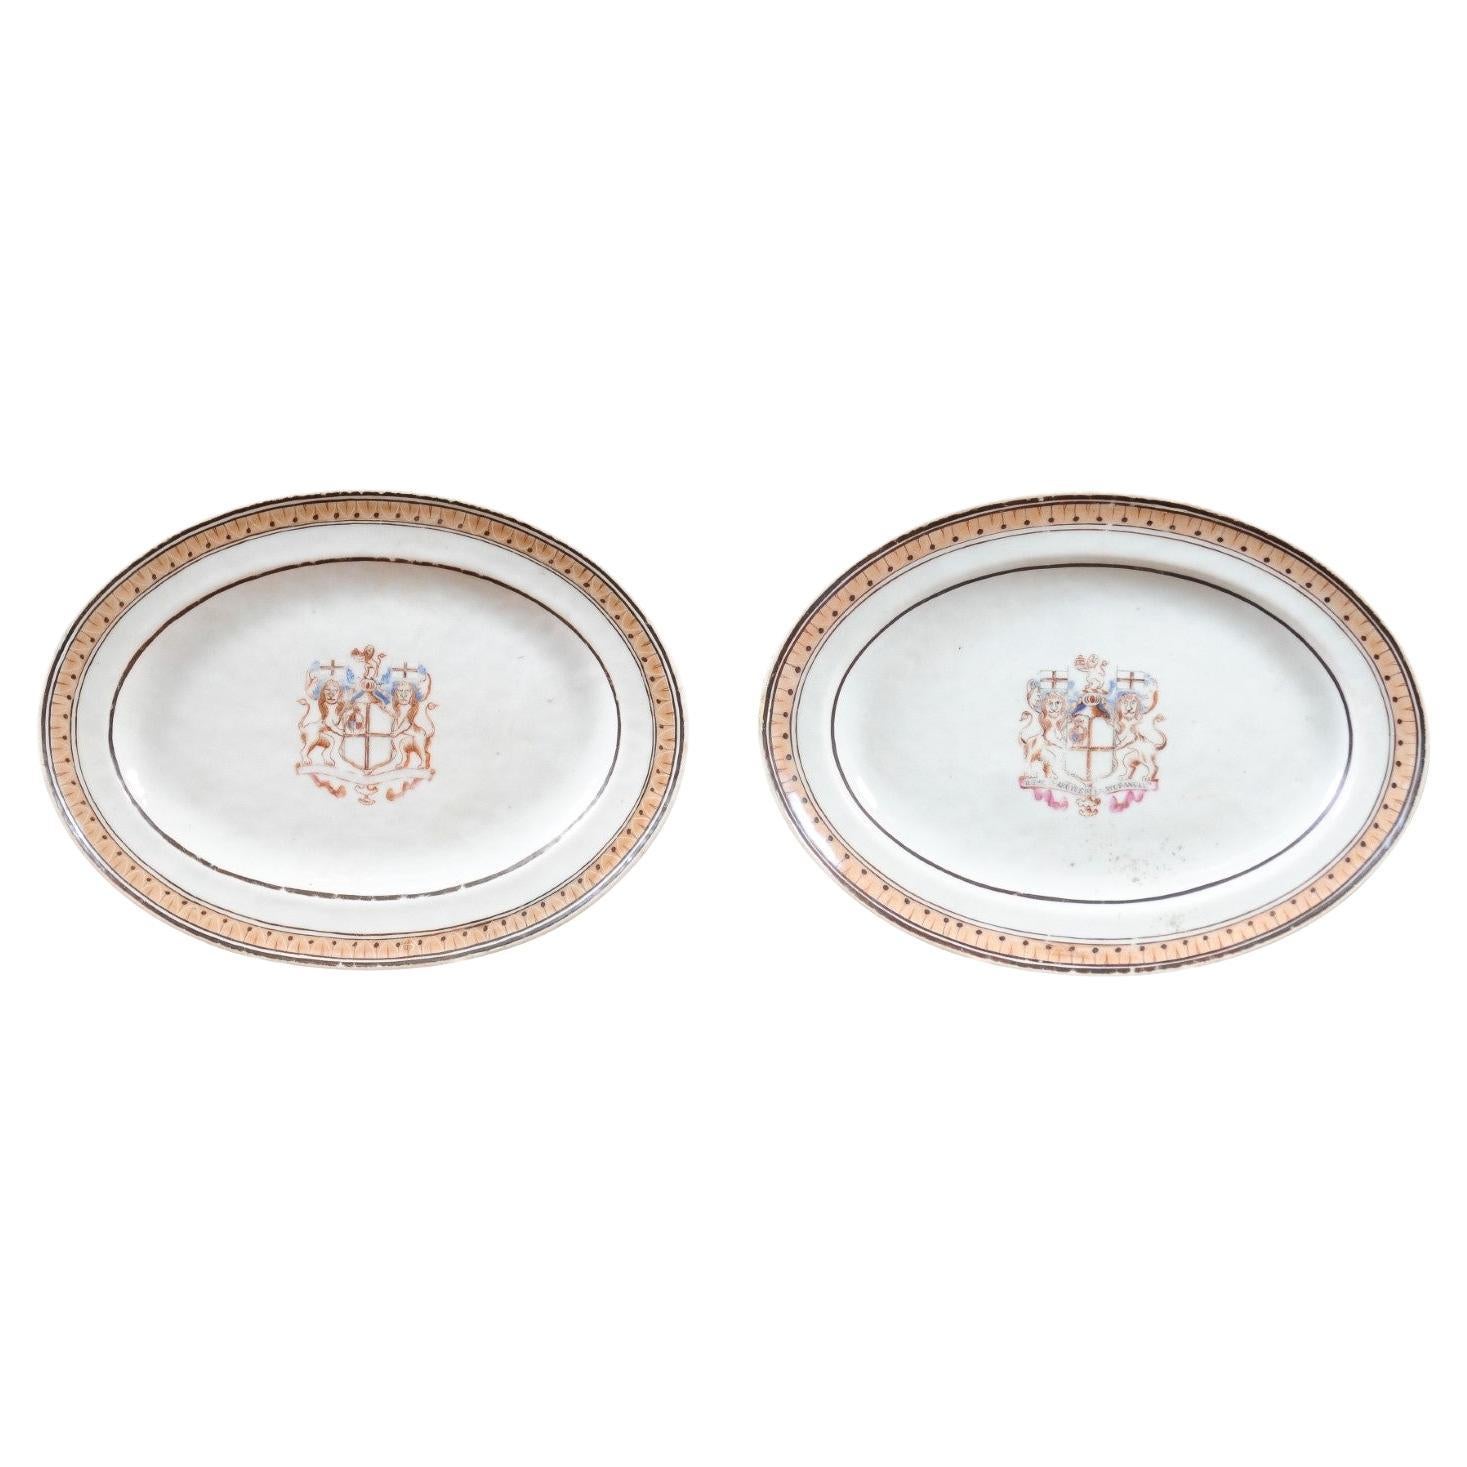 Pair of 18th Century Chinese Export Porcelain Platters with Armorial Crests